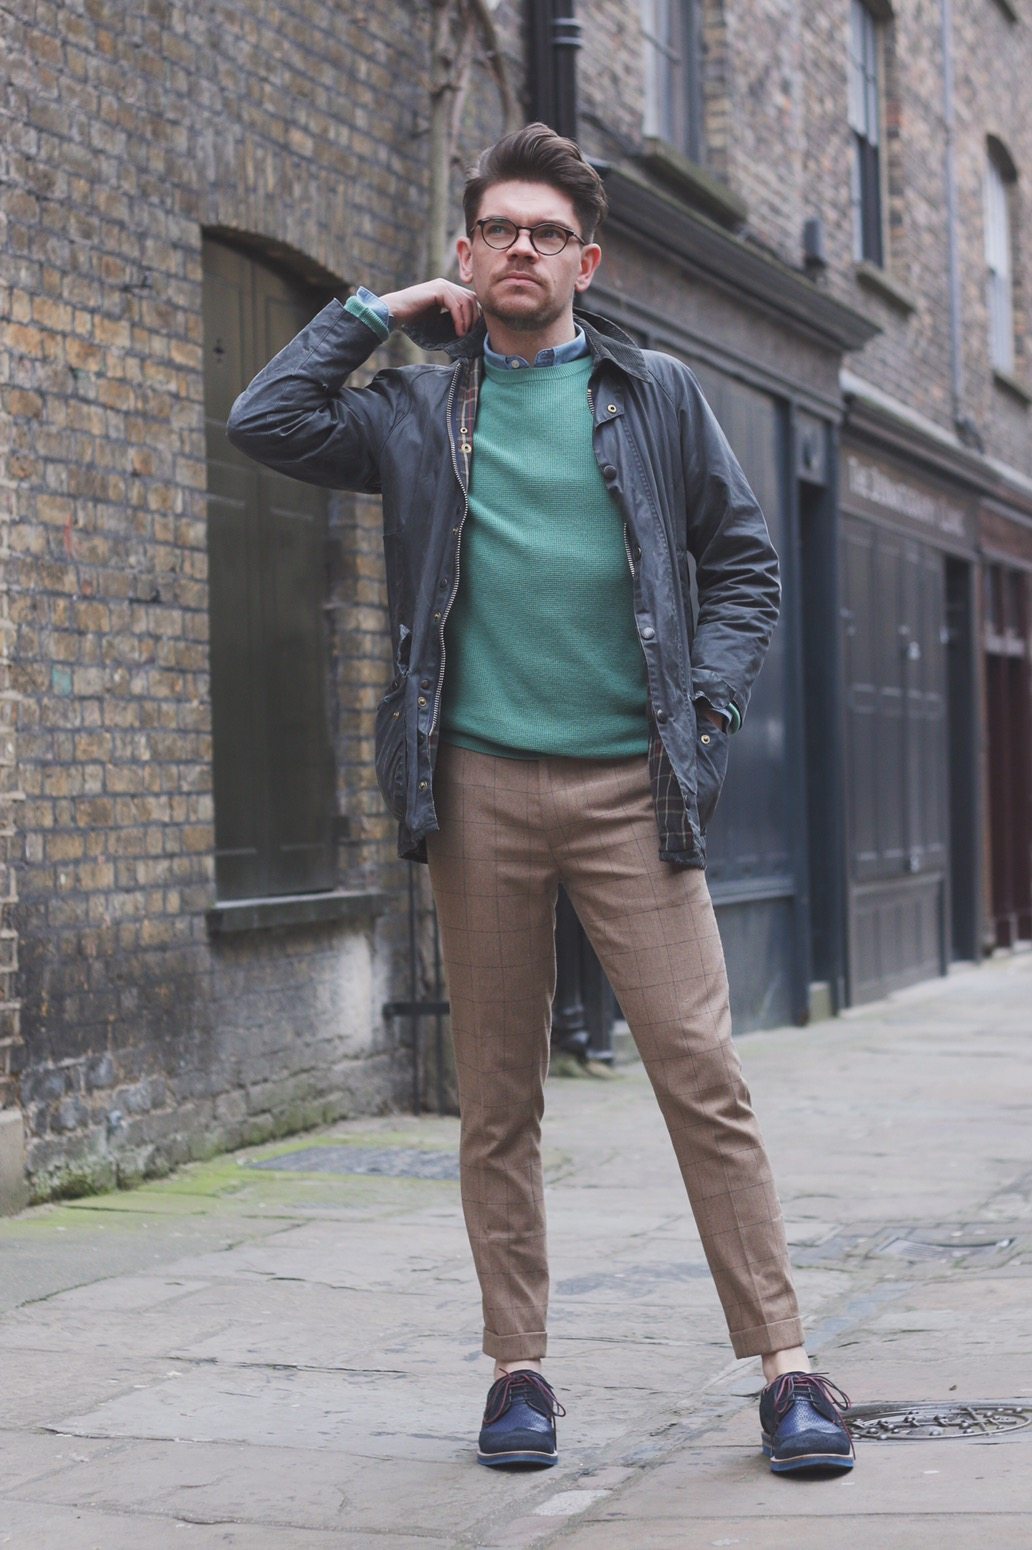 Cropped Trousers Are A Dashing Fashion Trend For Men